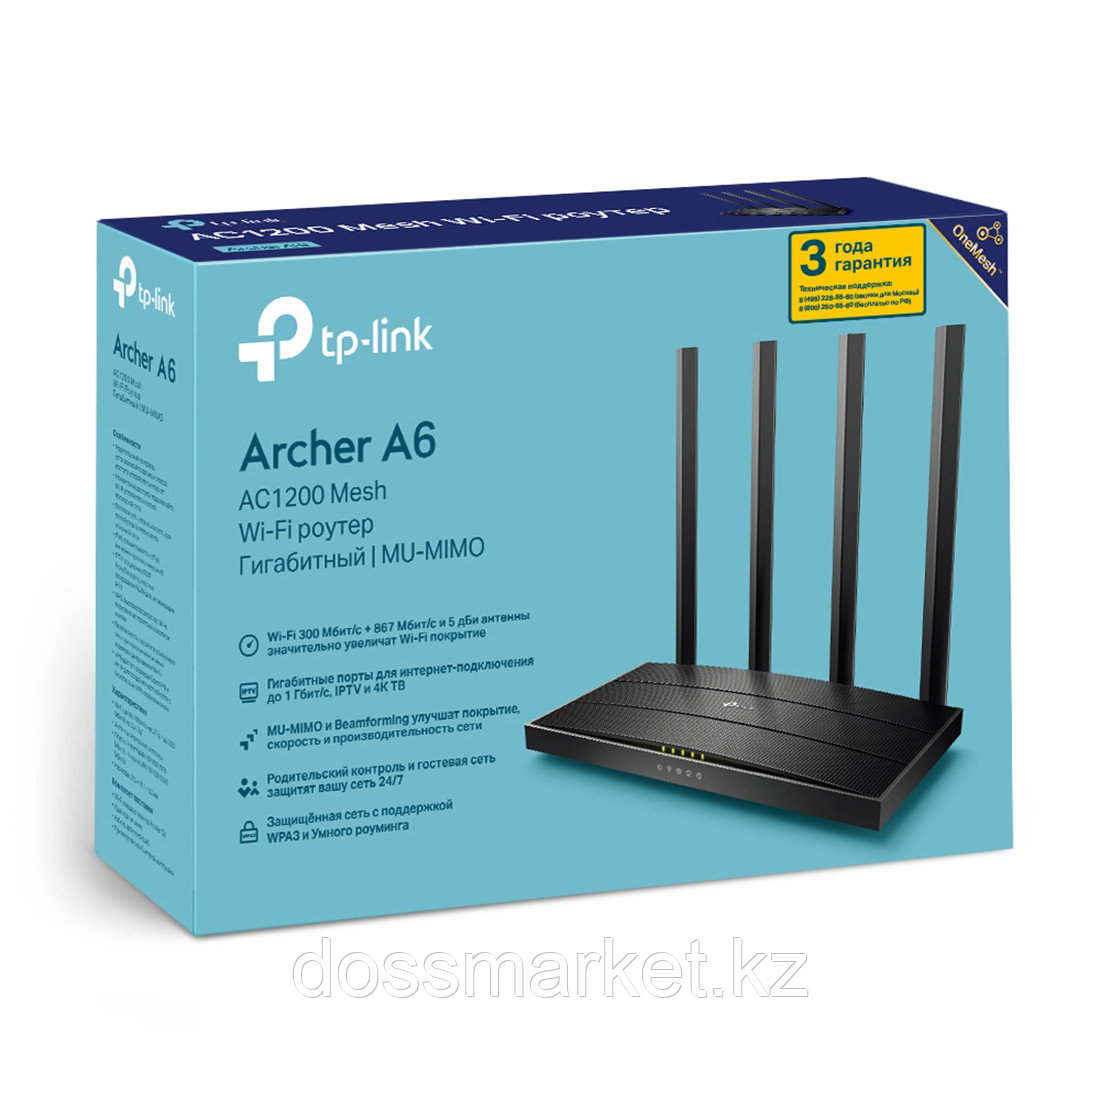 Маршрутизатор TP-Link Archer A6 - фото 3 - id-p106440614